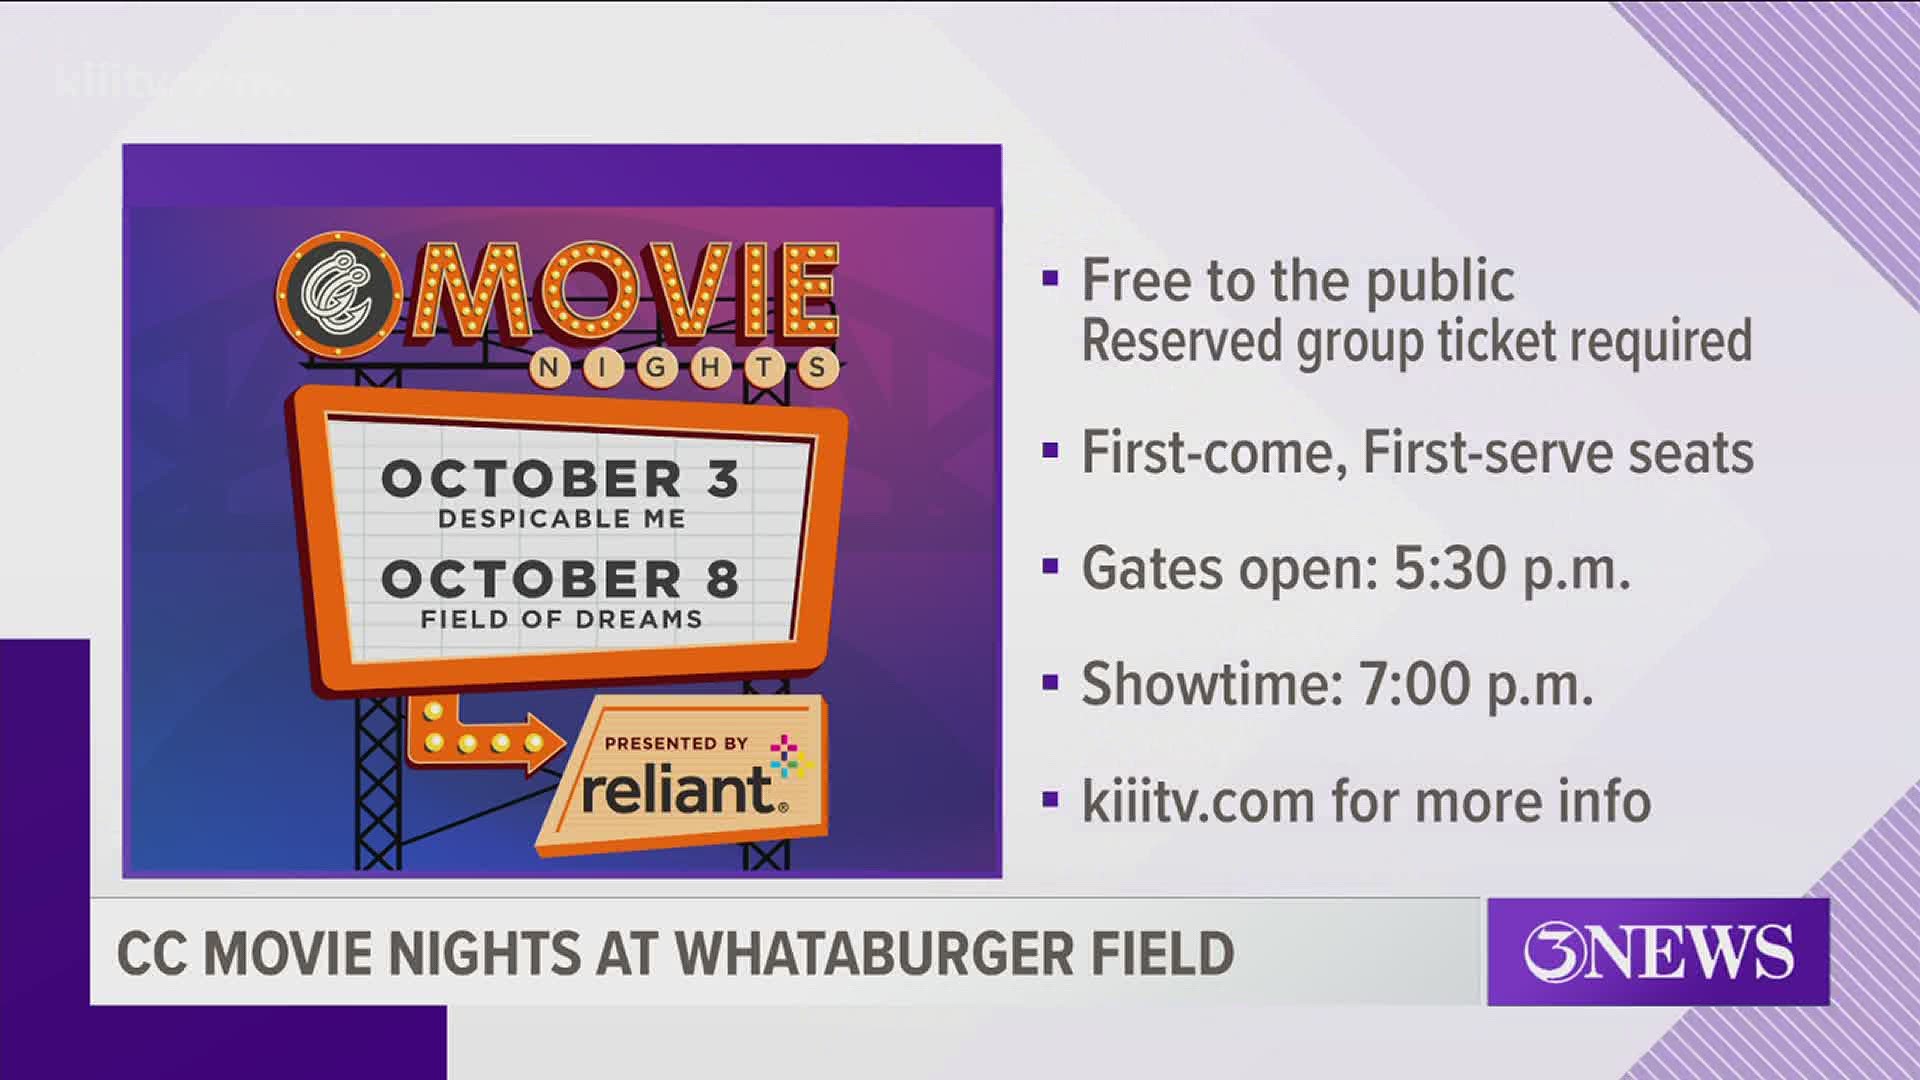 Movie nights are free to the public. Here's what you need to know before you go!